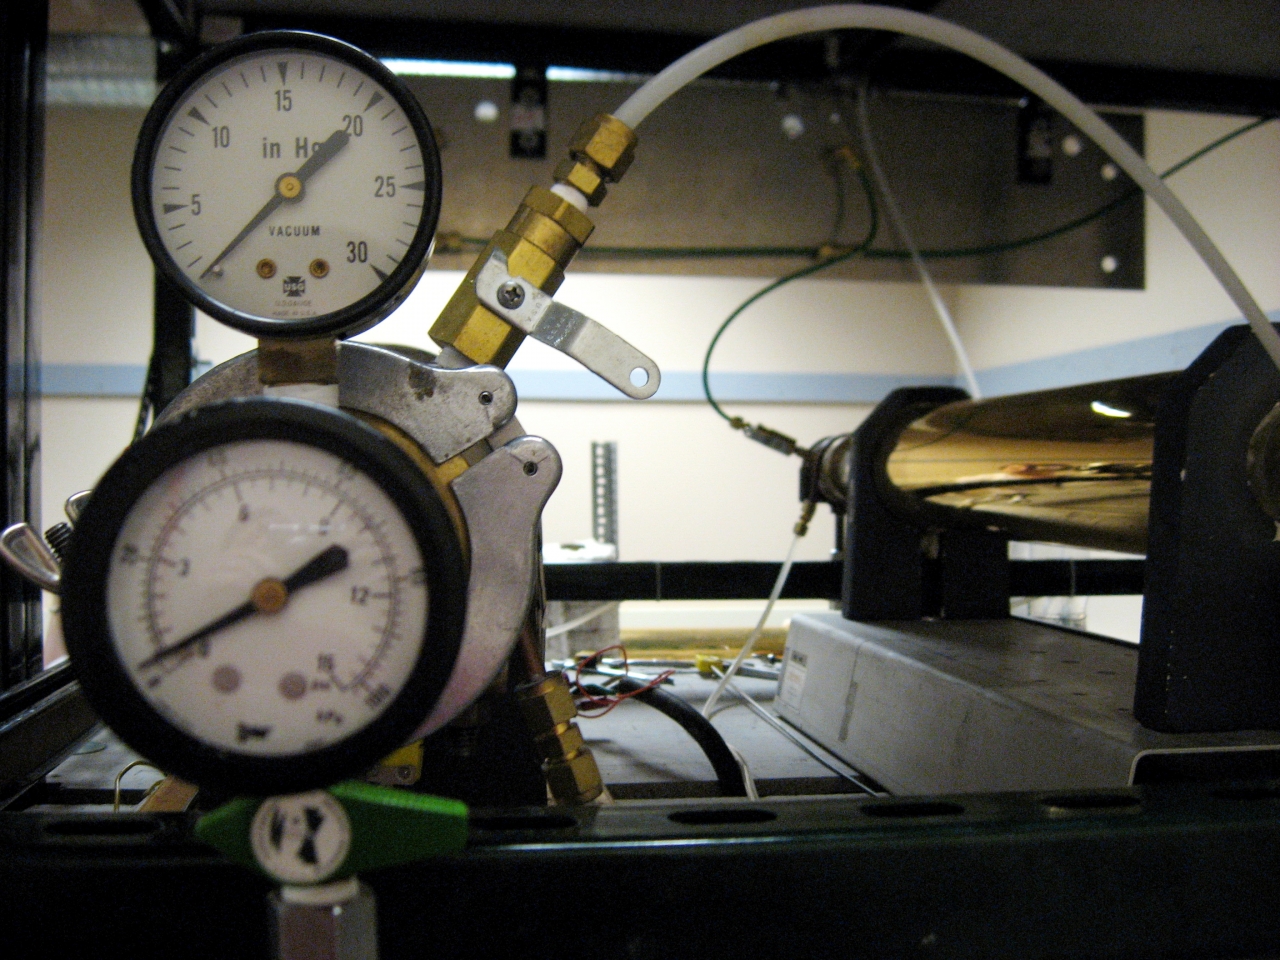 Conductivity experiment equipment and gauges.